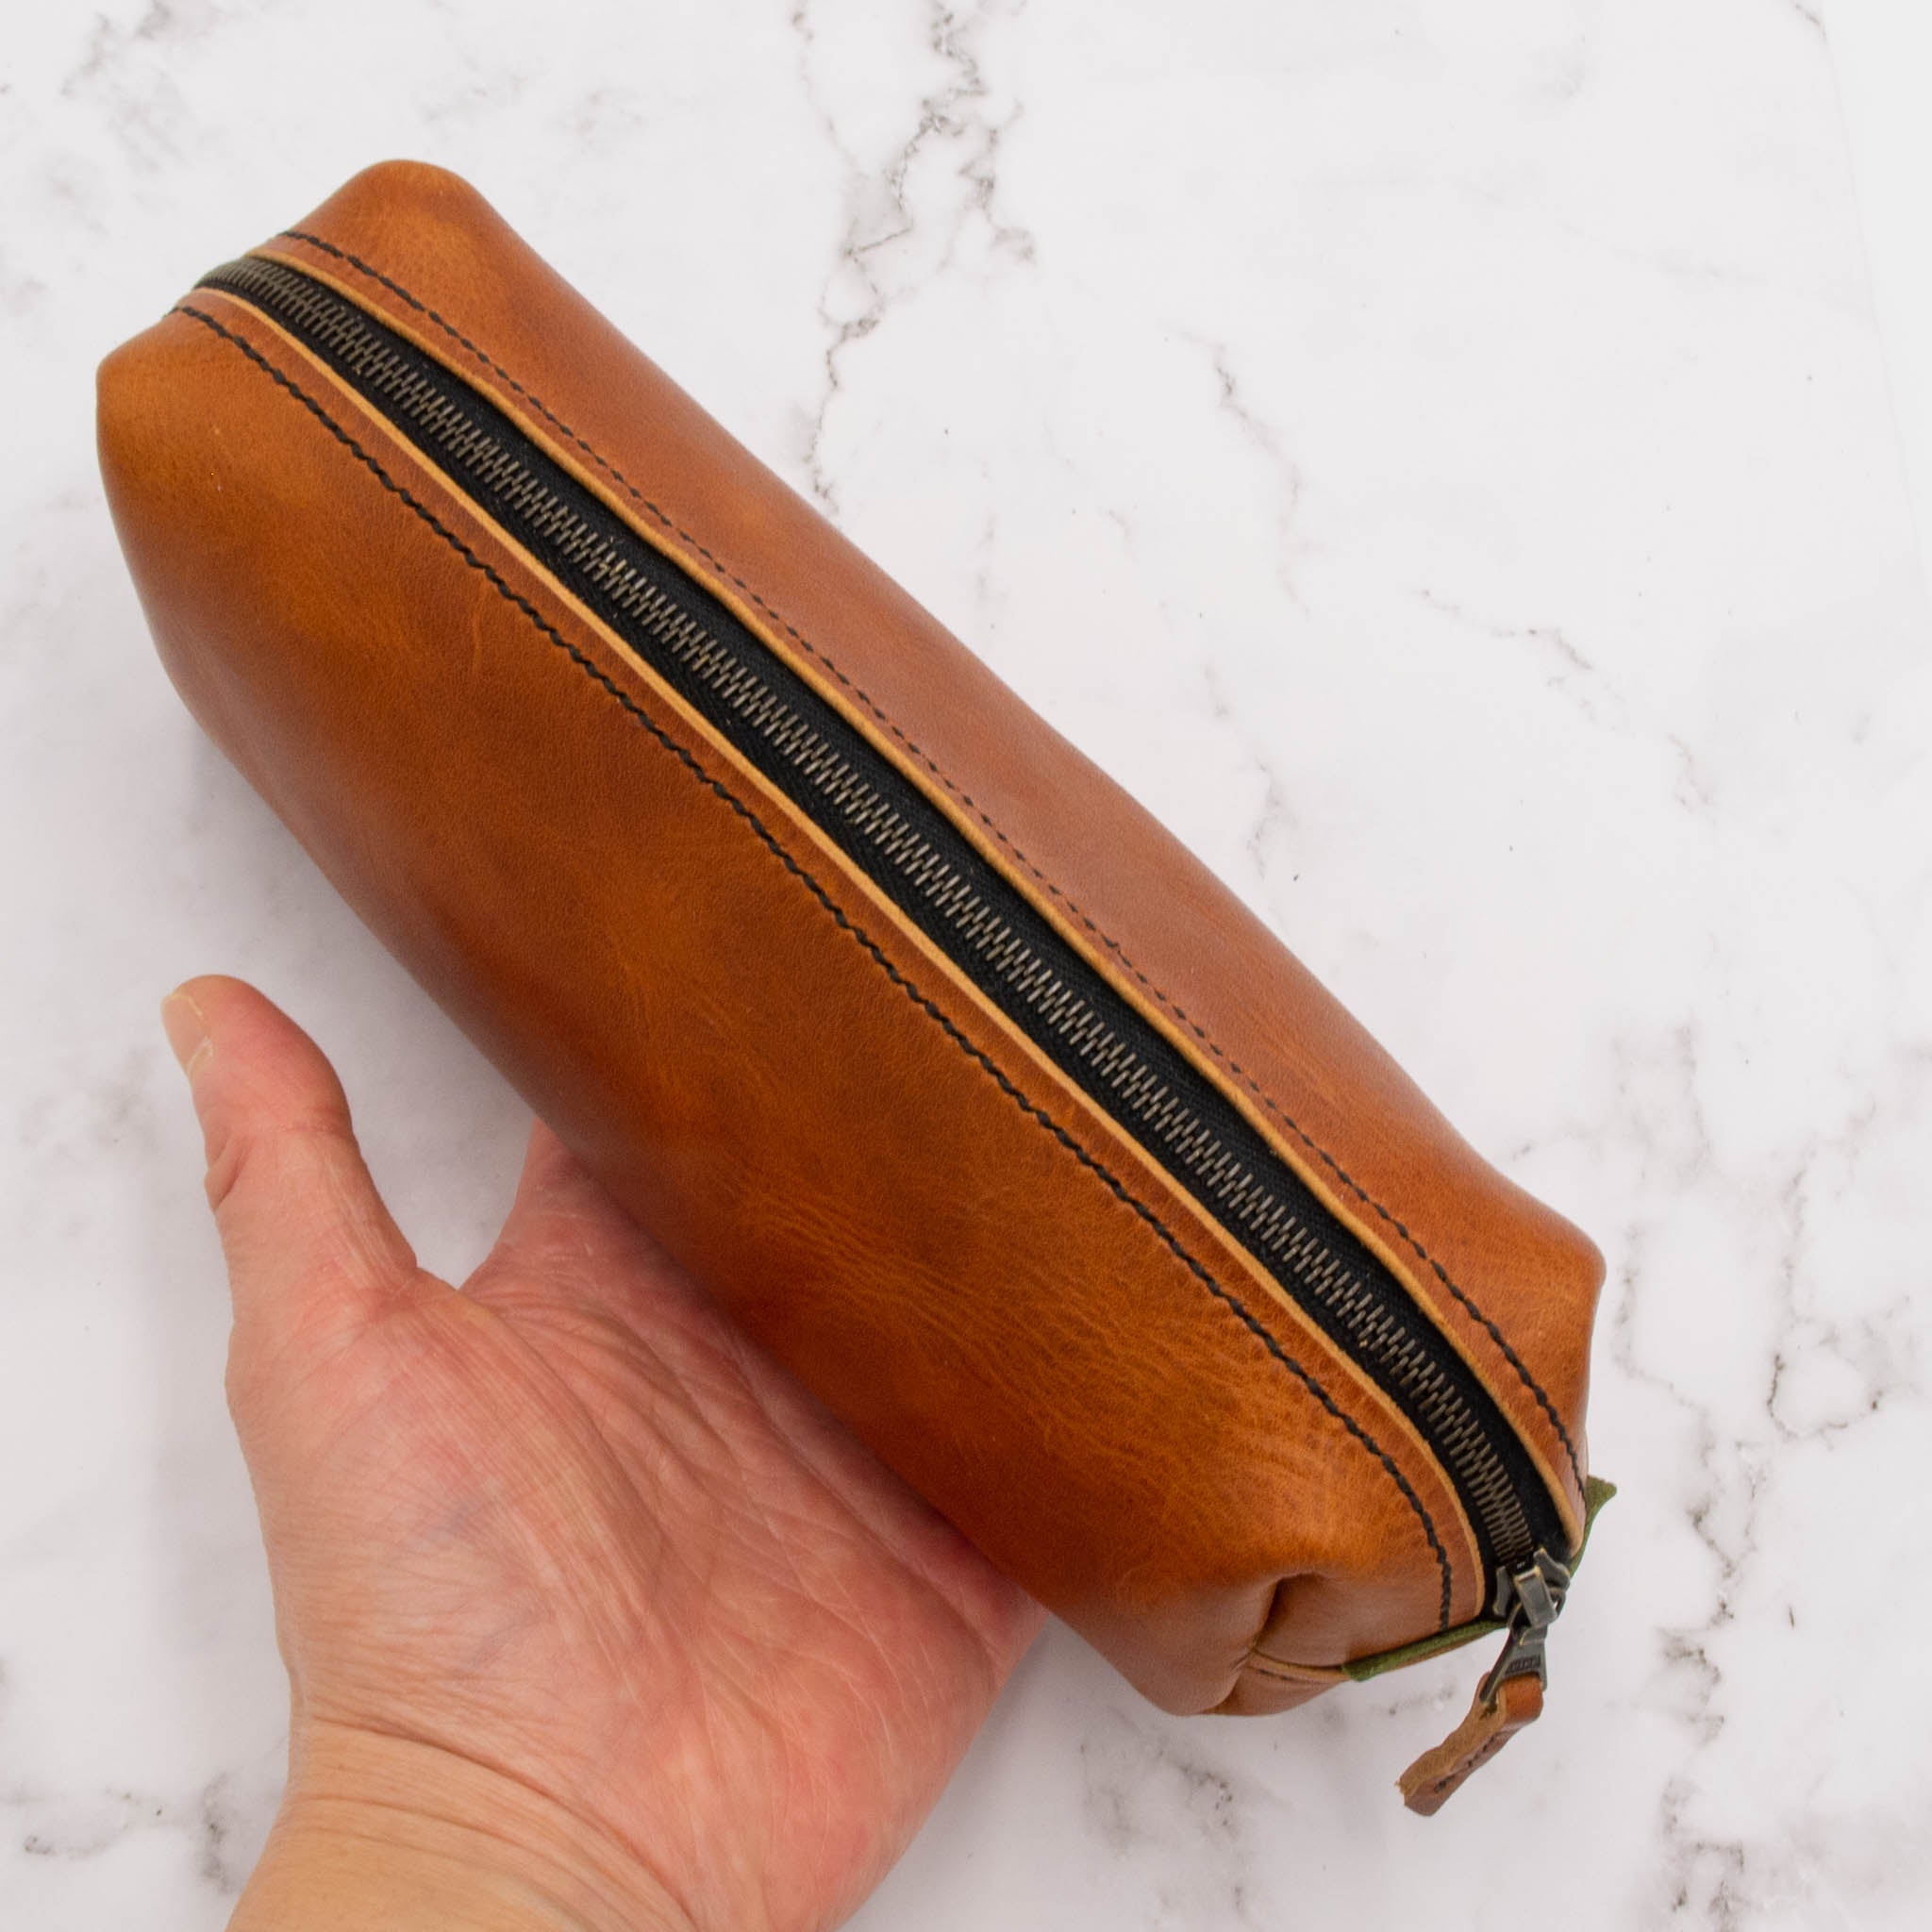 Handcrafted Leather Pen Case with Zipper